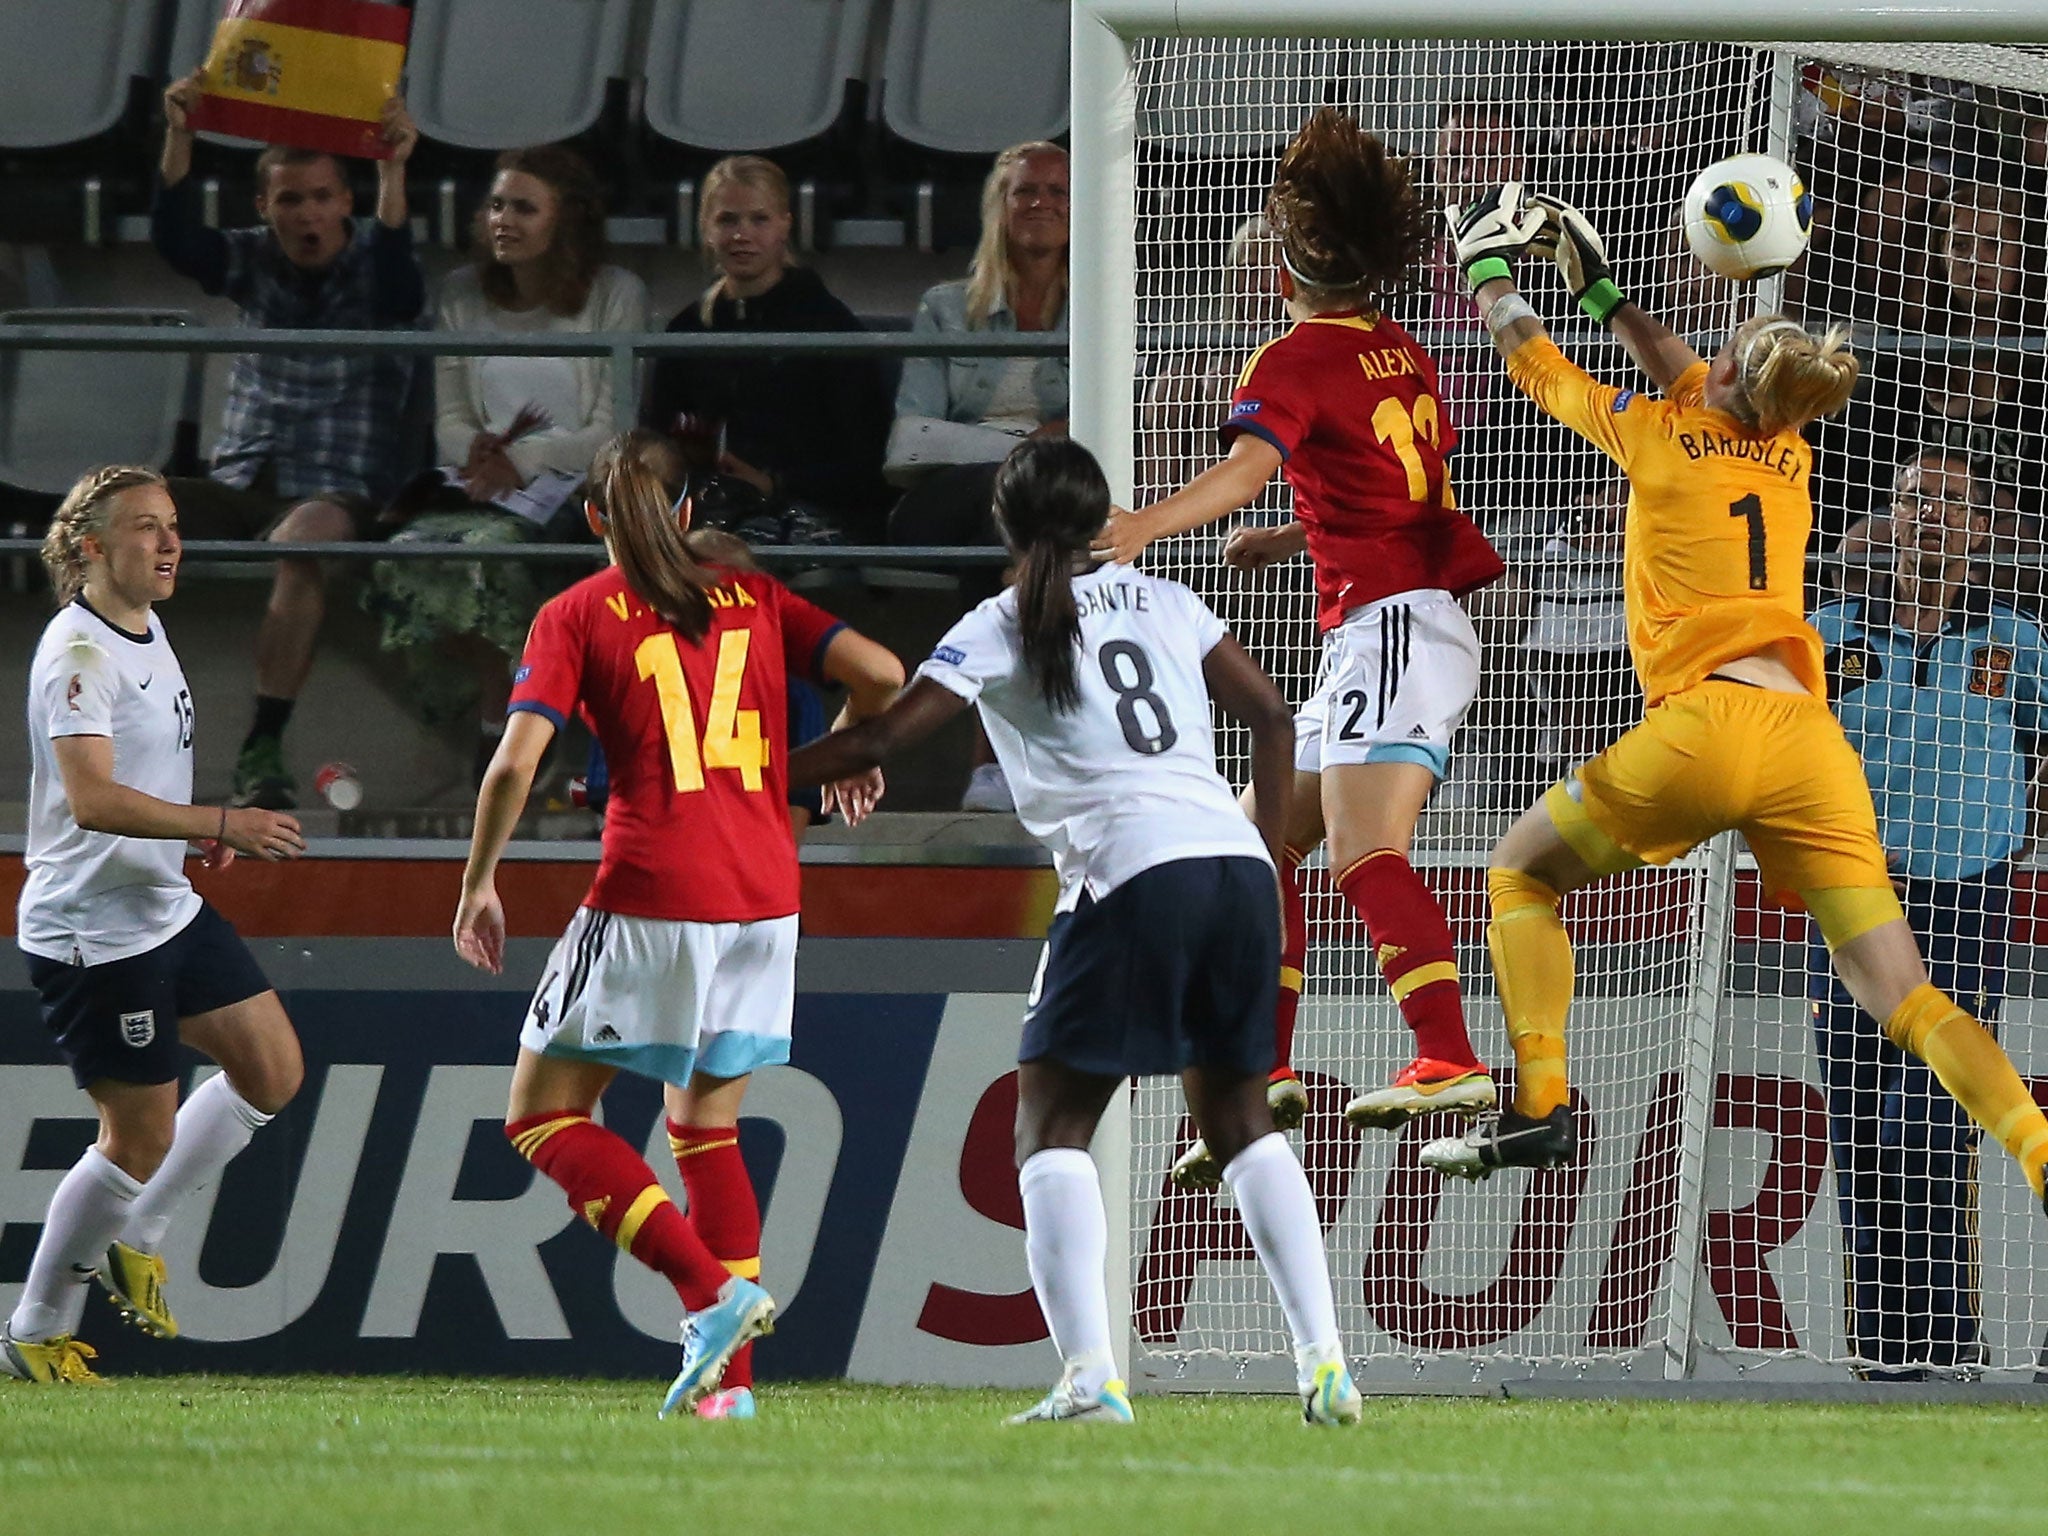 Losing face: The ball hits England keeper Karen Bardsley and goes in